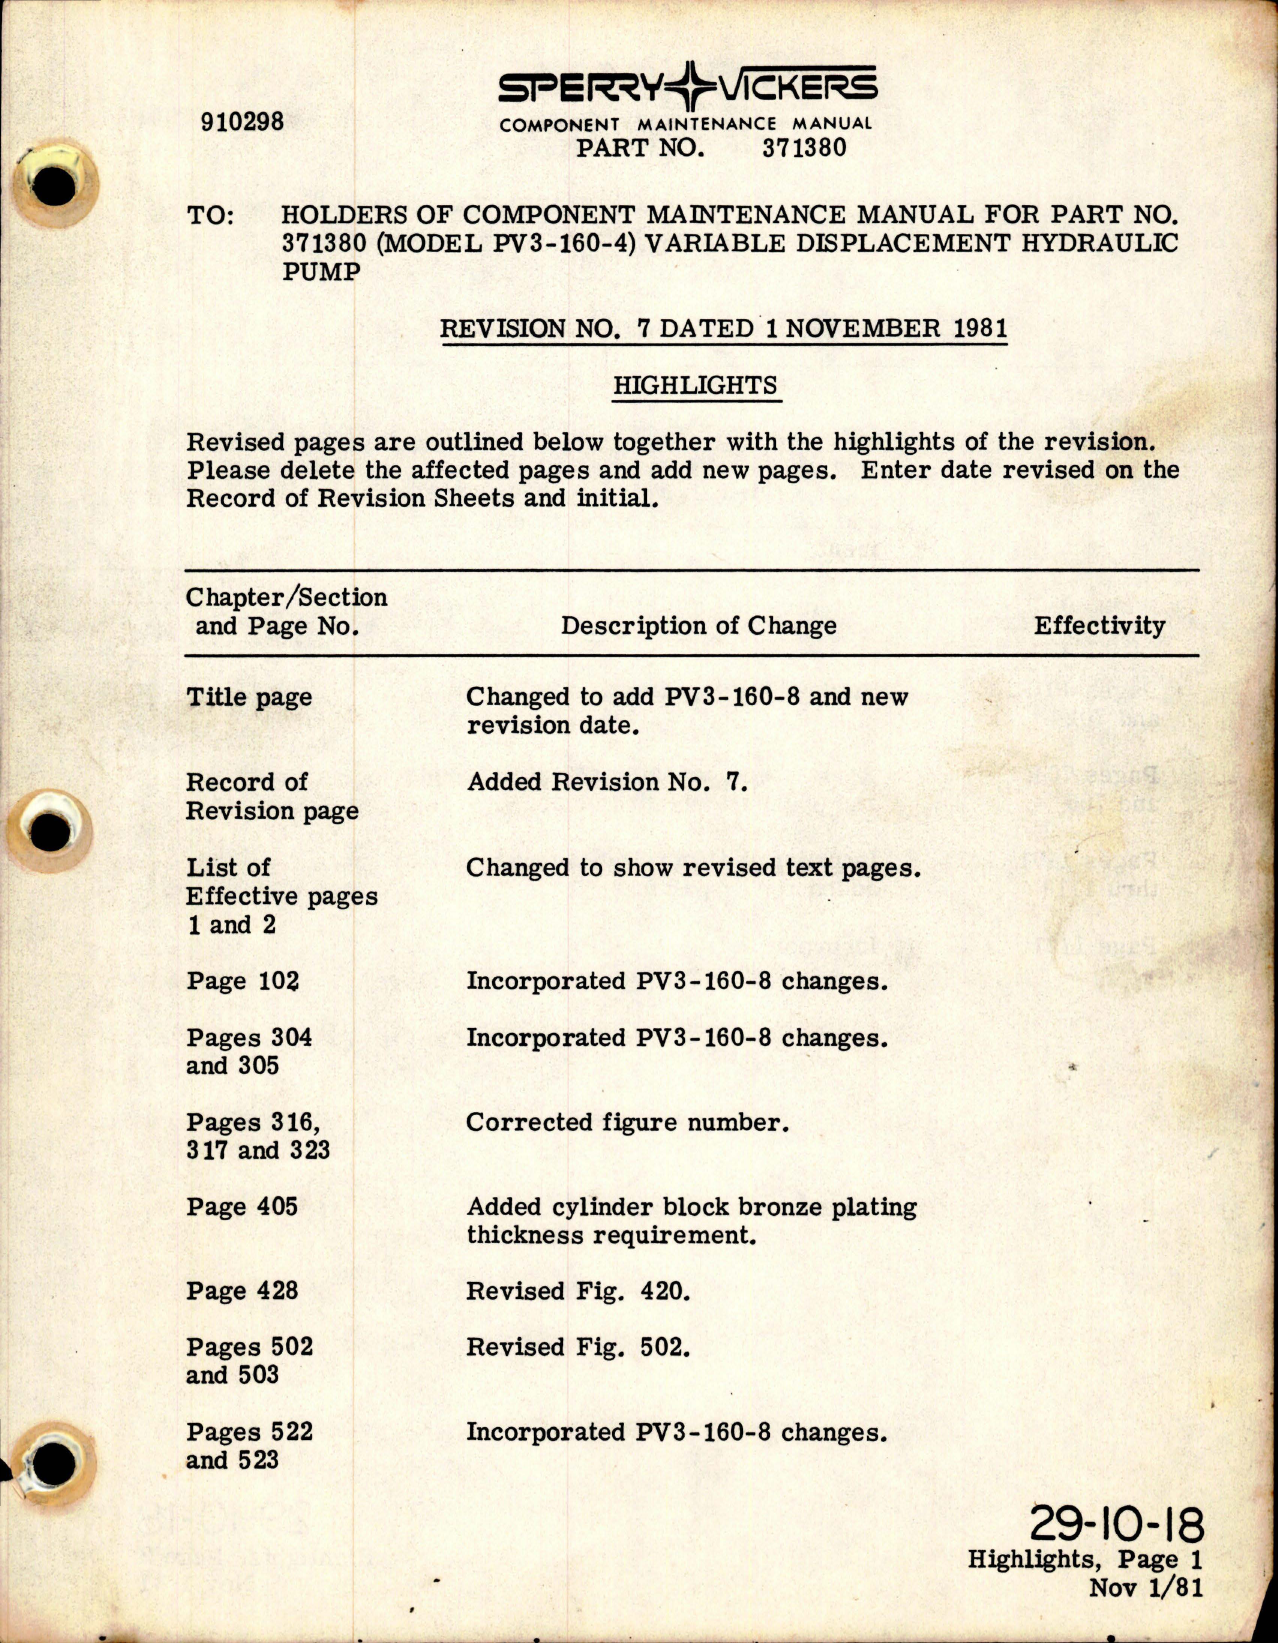 Sample page 1 from AirCorps Library document: Maintenance Manual with Illustrated Parts List for Variable Displacement Hydraulic Pump - Part 371380 - Revision No. 7